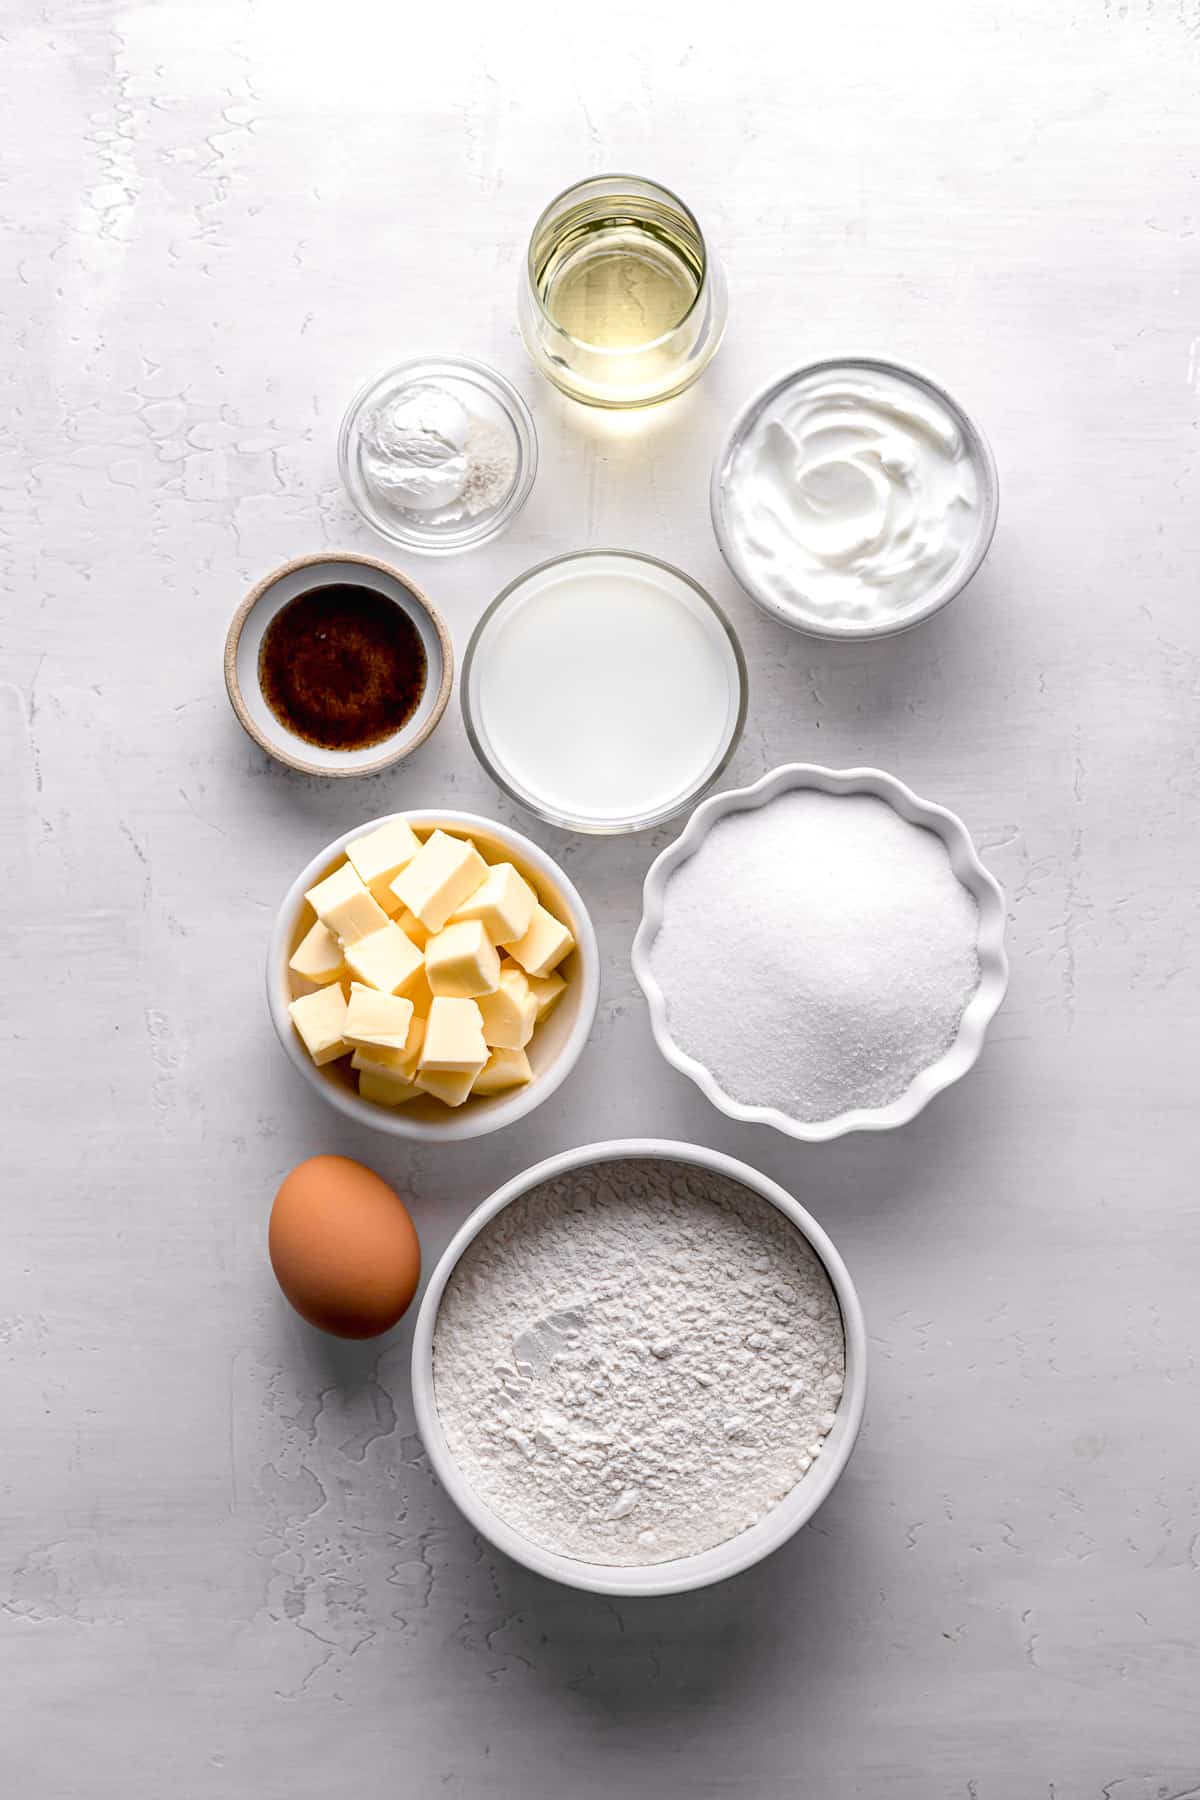 ingredients for small vanilla cake recipe.